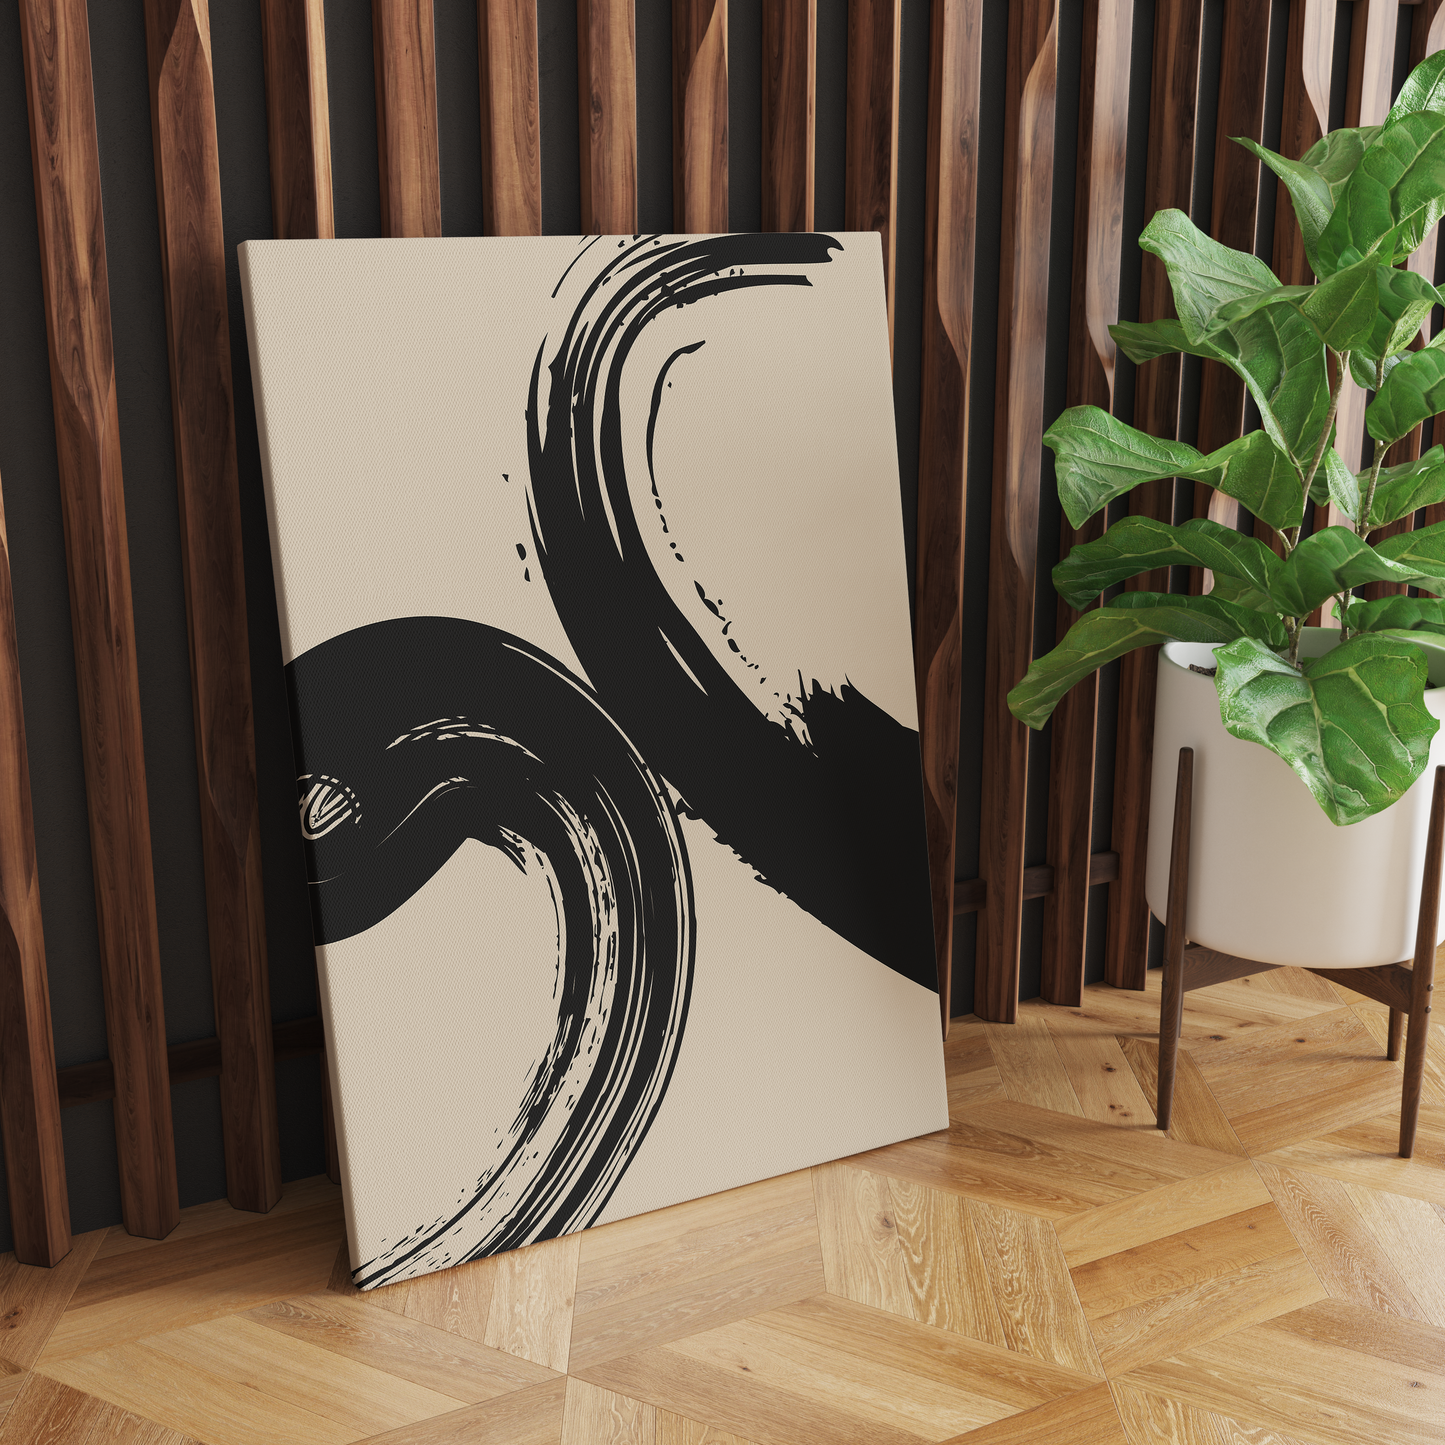 Painted Black Brushes Canvas Print